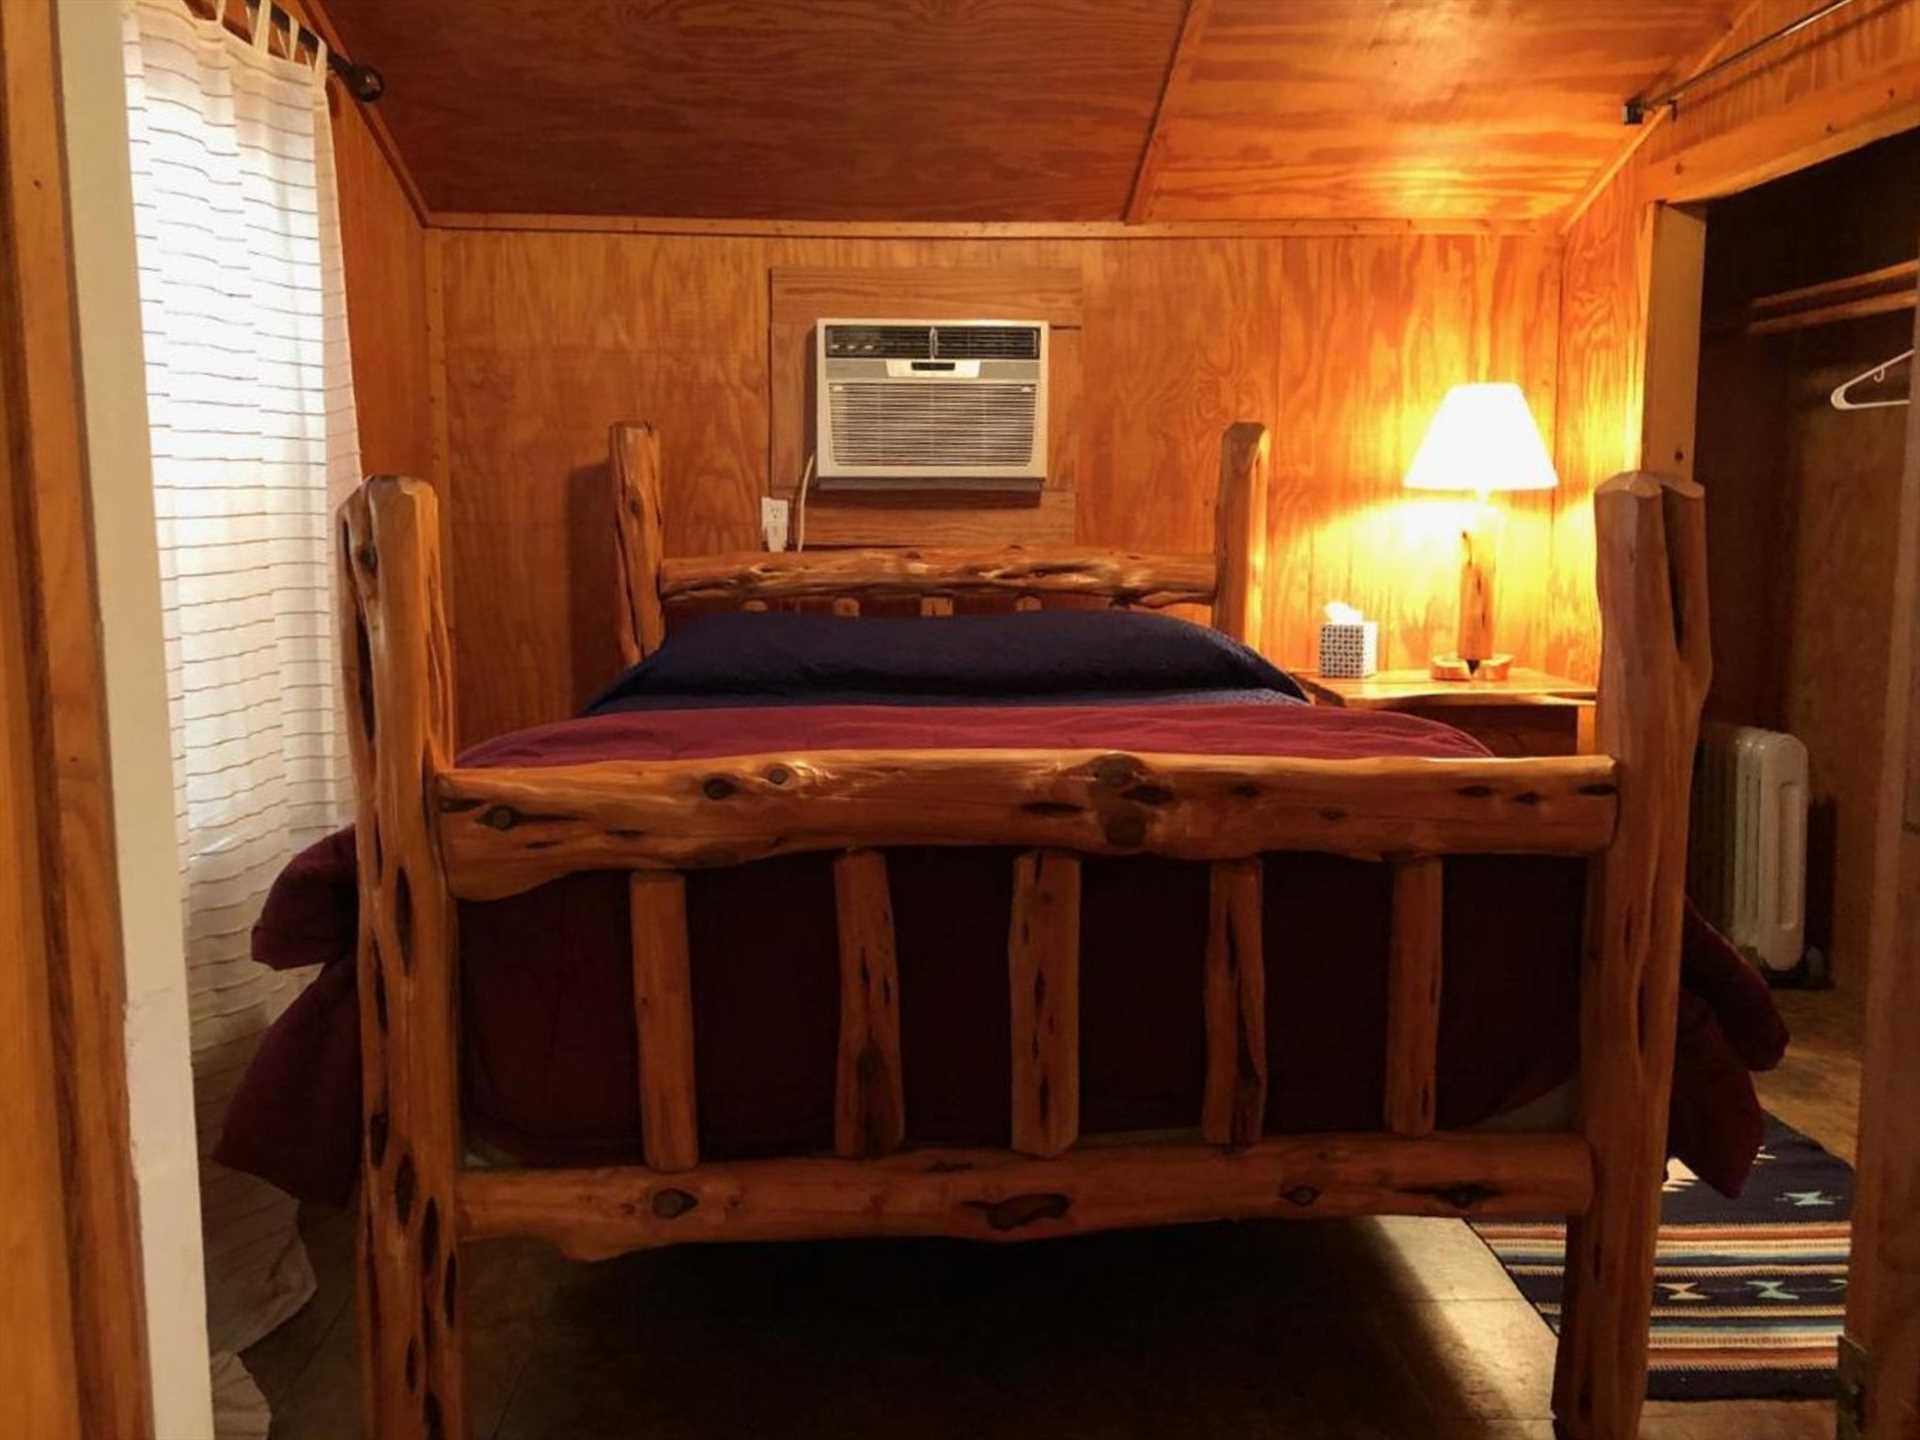                                                 Sturdy cedar-framed queen and twin beds create comfortable sleeping arrangements for up to three-complete with clean linens, of course!